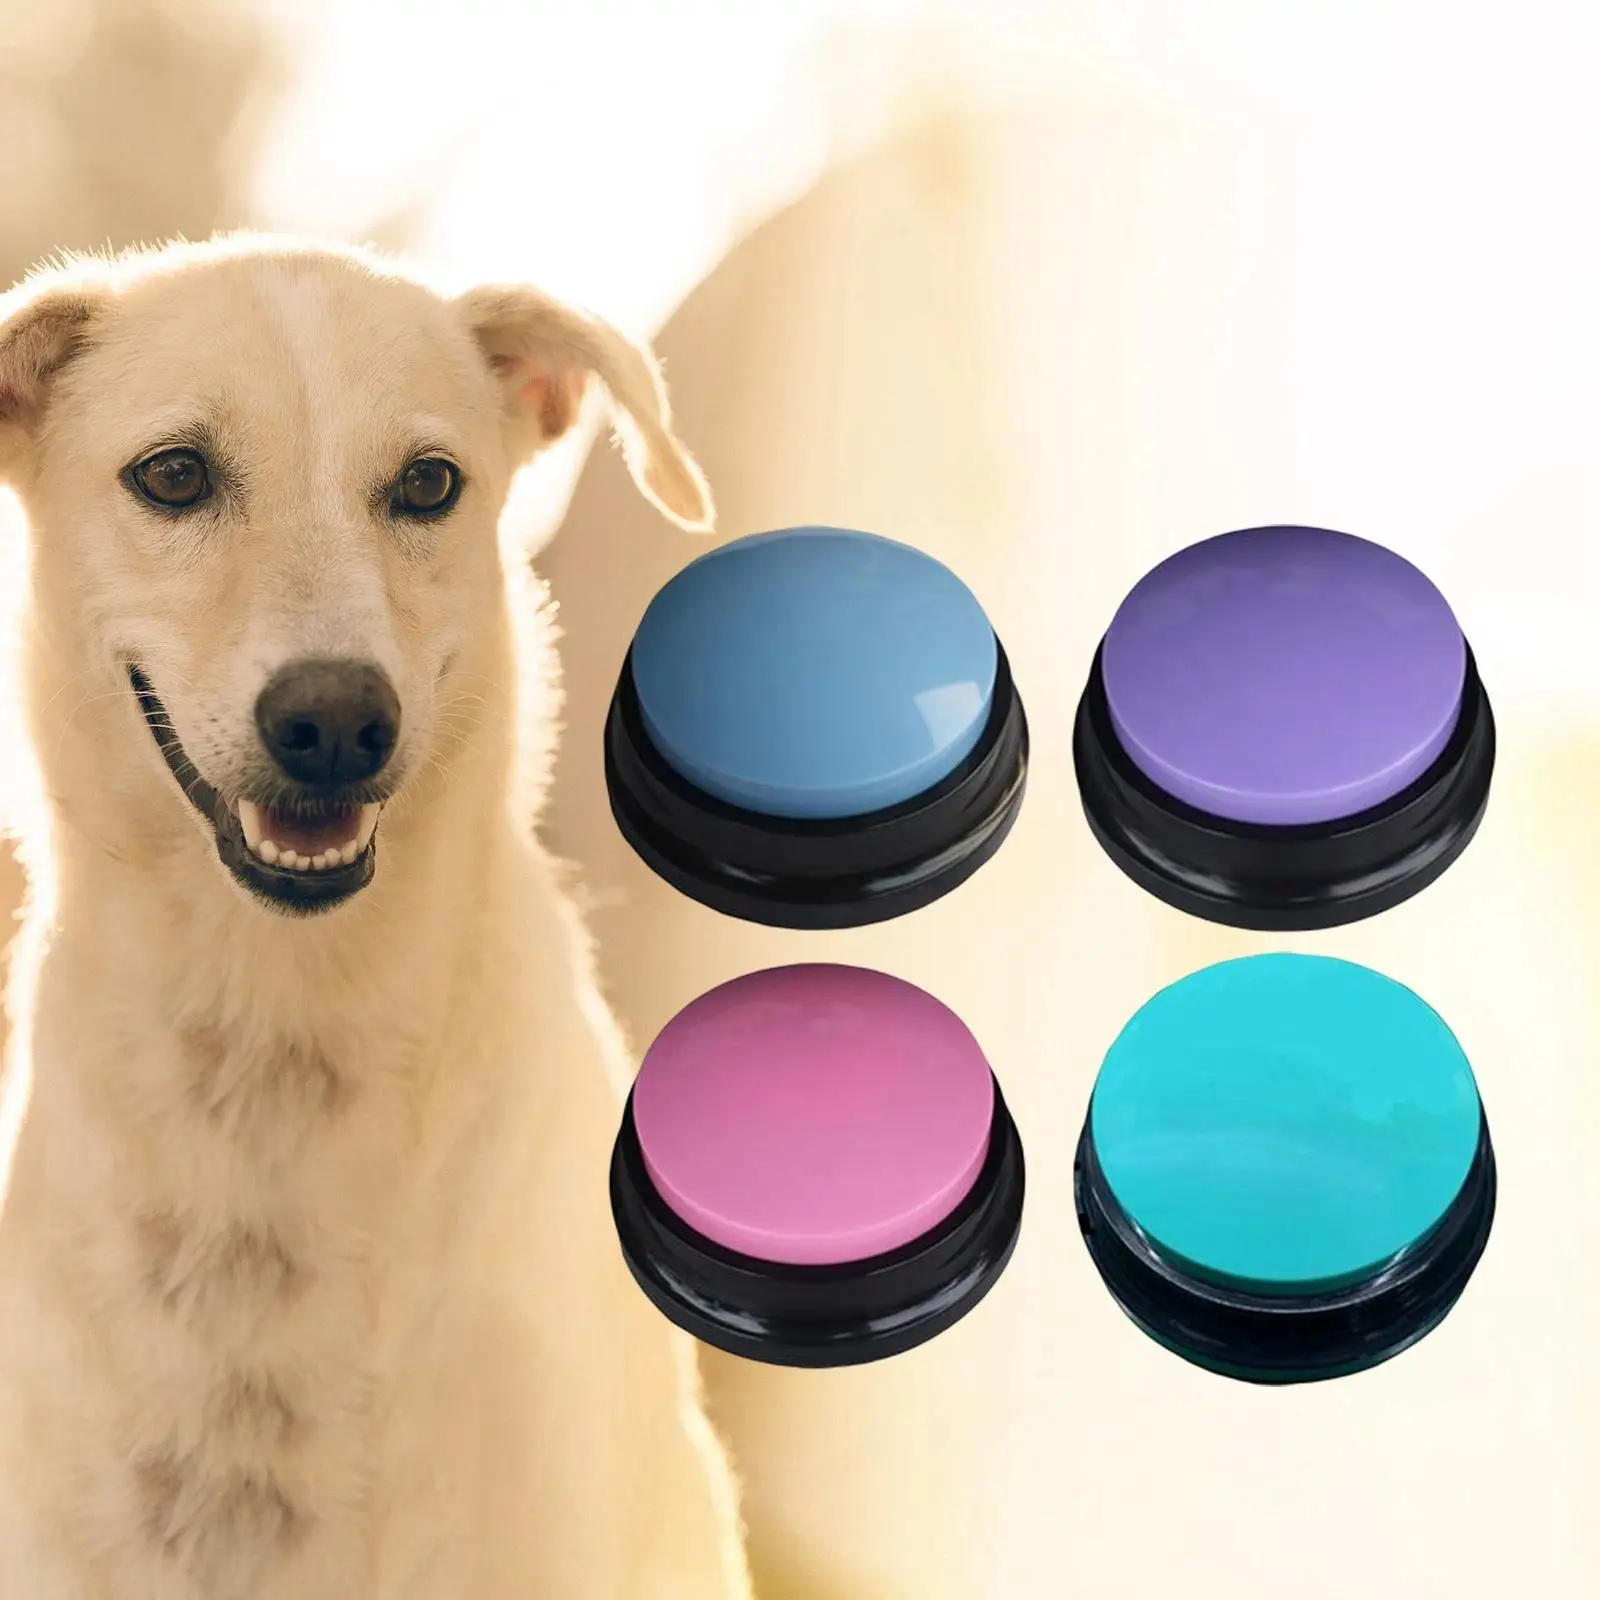 4x Recordable Talking Button Dog Interactive Toy Talking Recording Sound Button for Kids Child  Pet Training